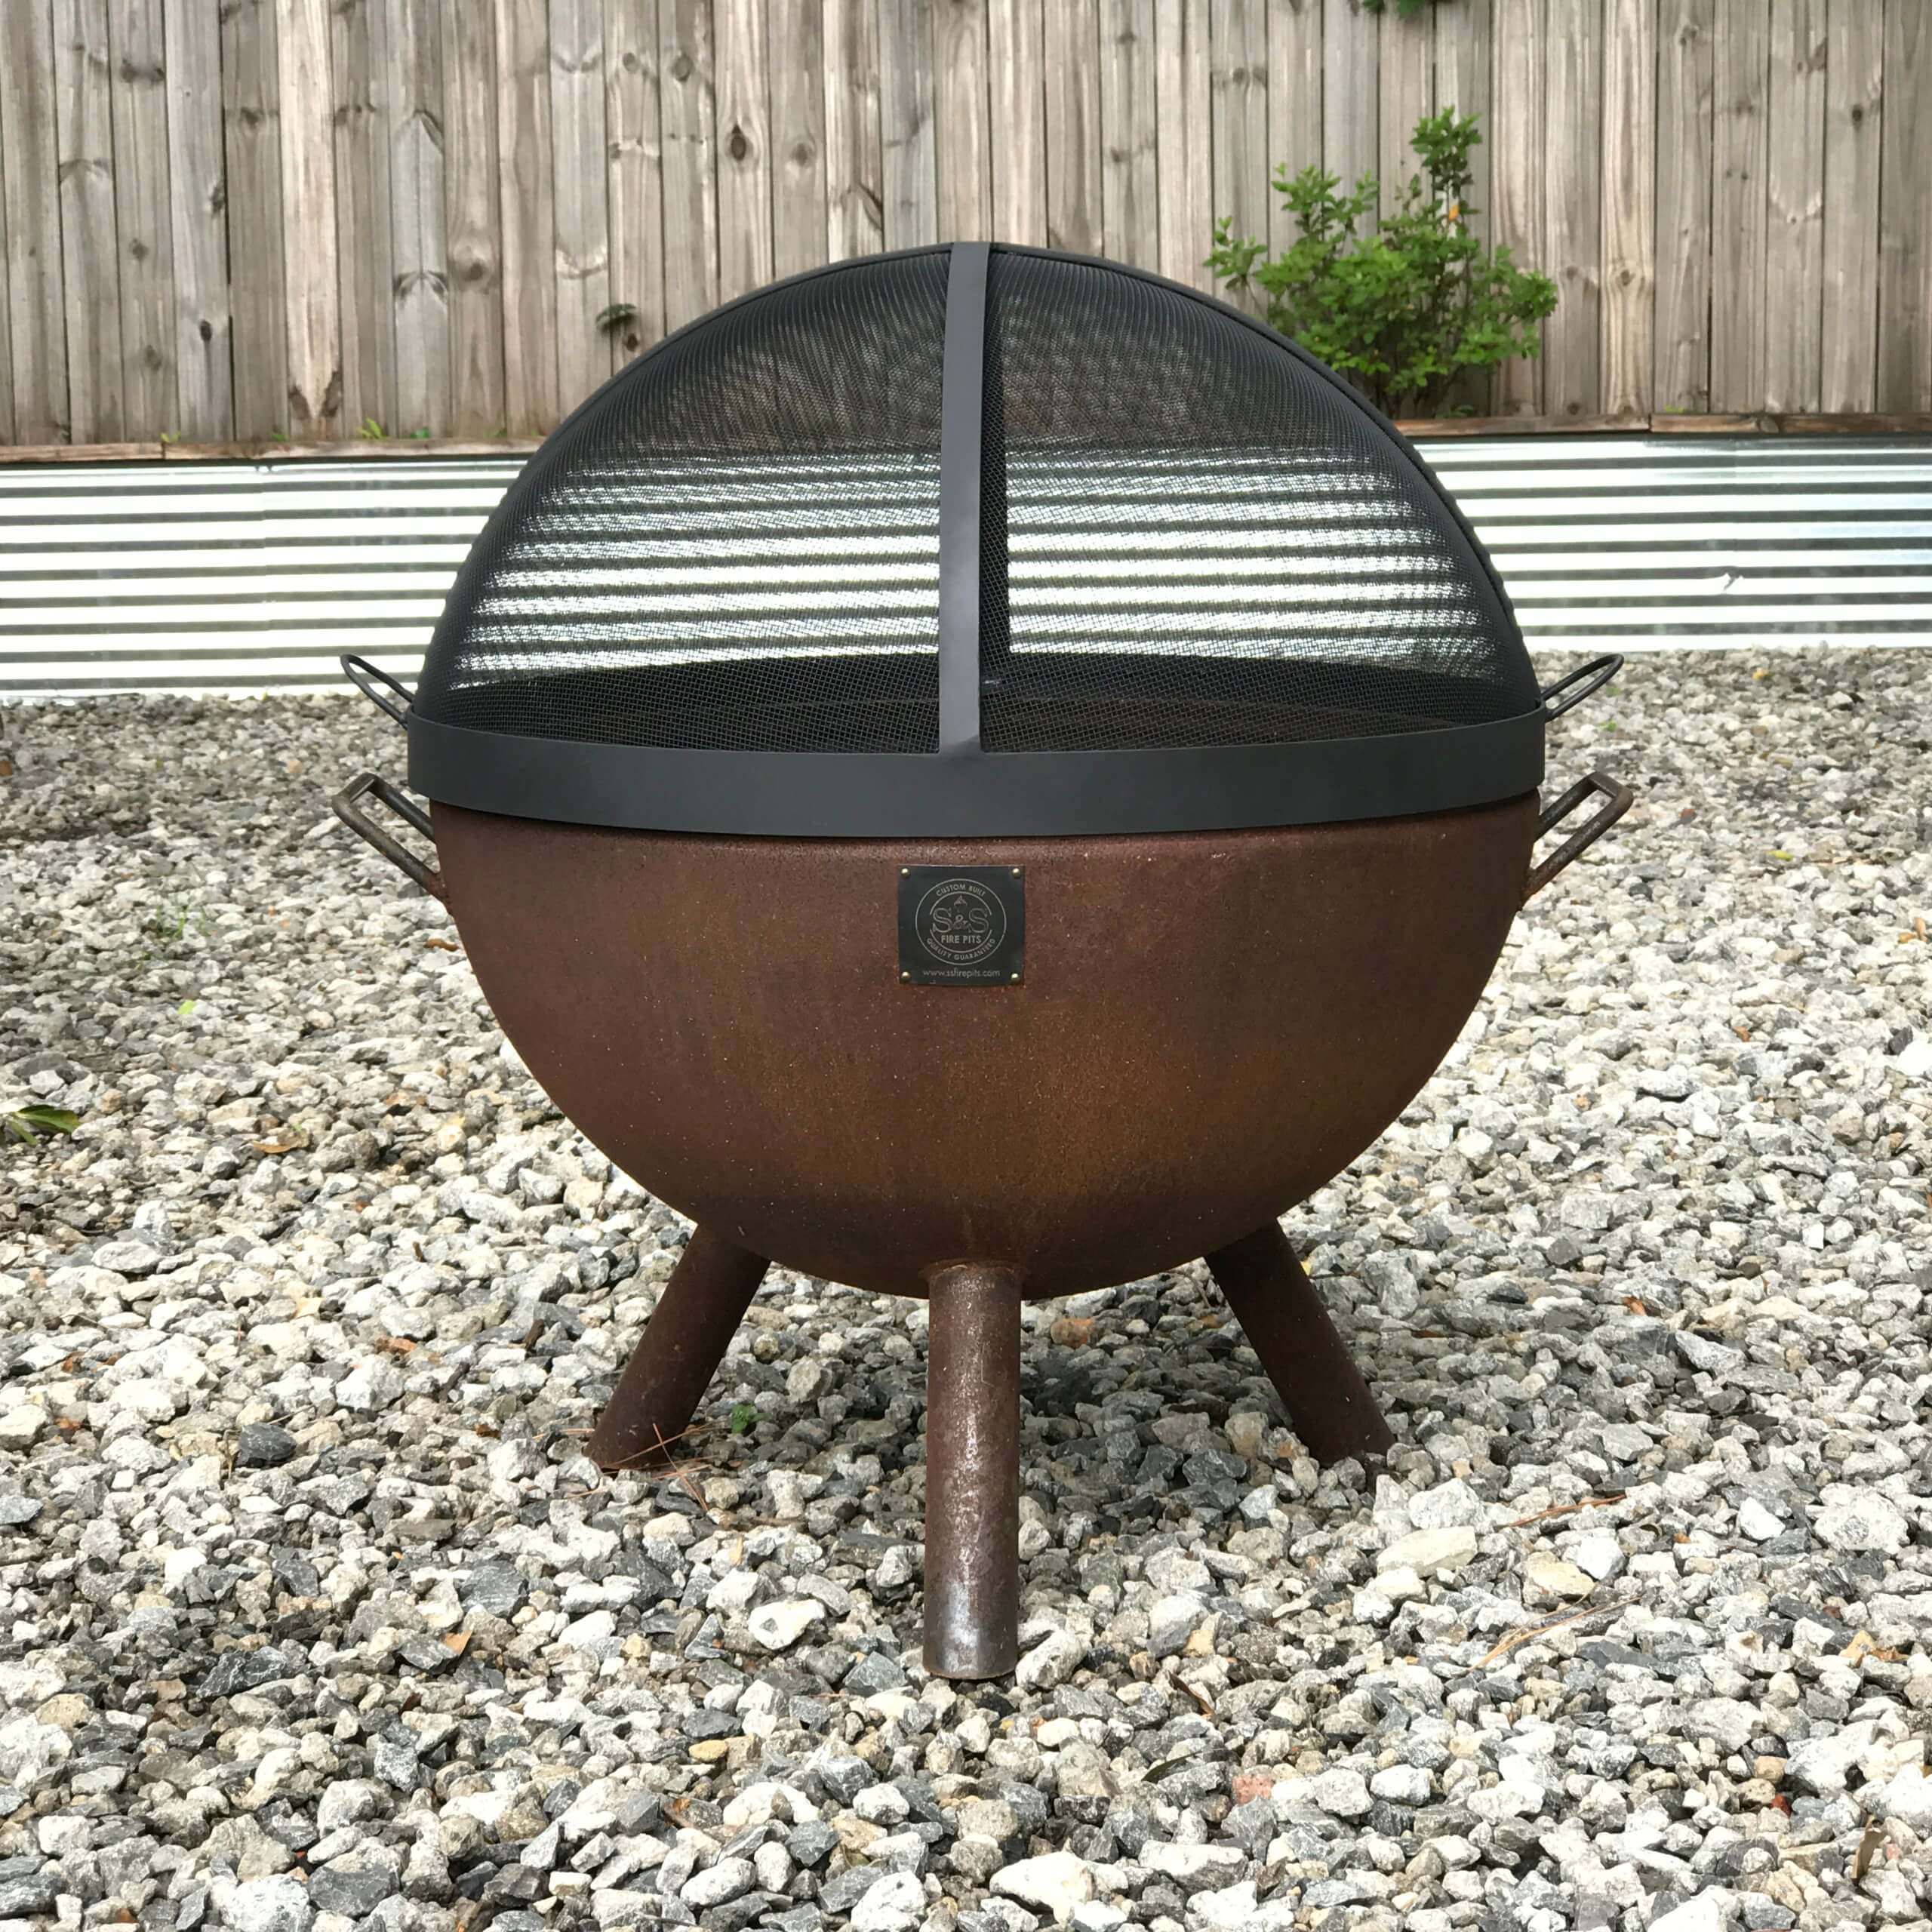 42 Dome Lift Off Fire Pit Screen - Stainless Steel